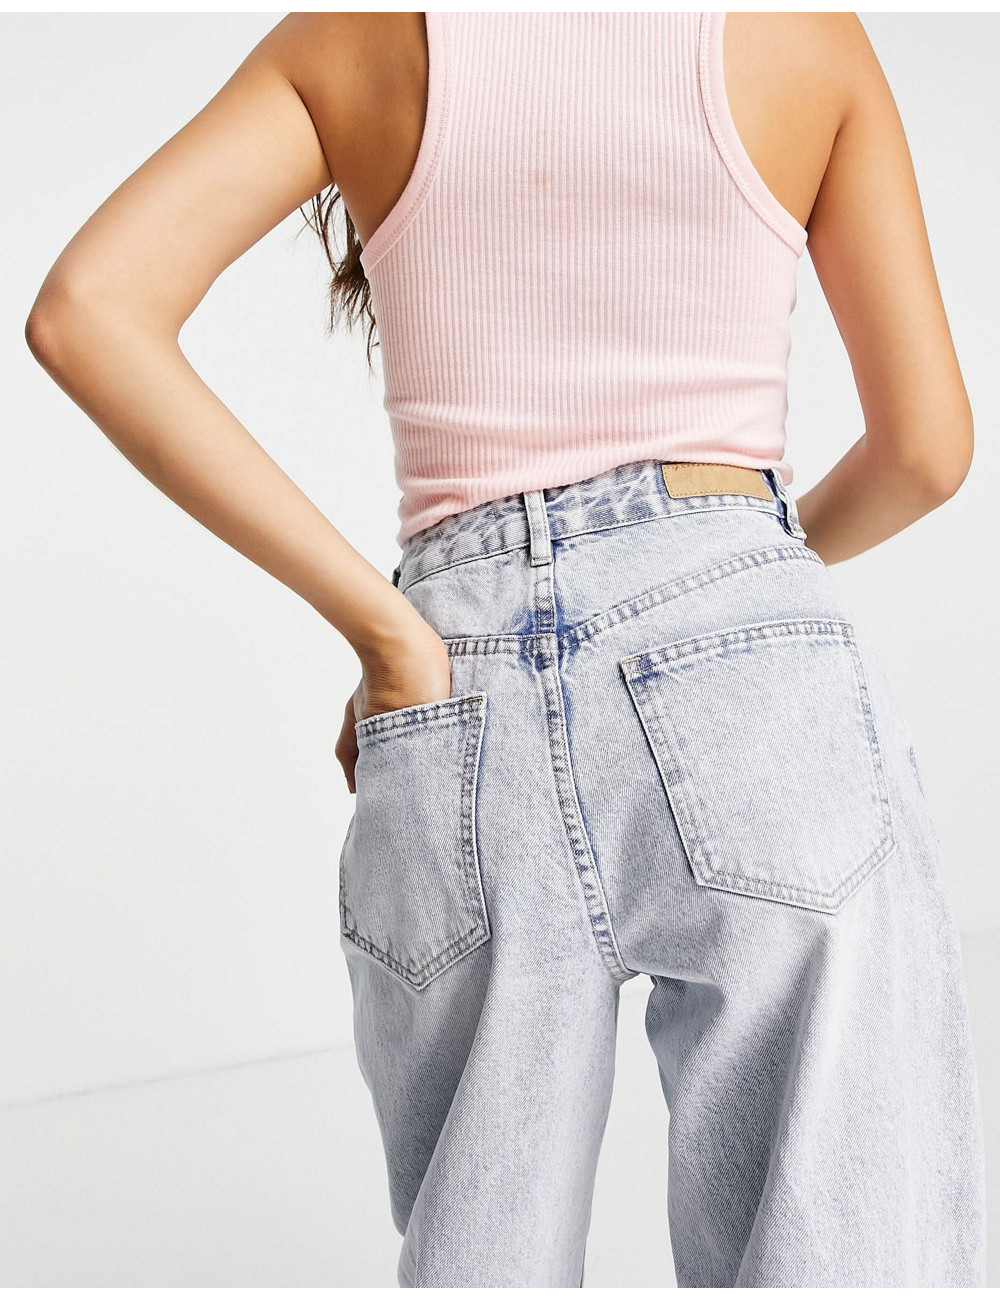 Cotton:On slouchy mom jeans...